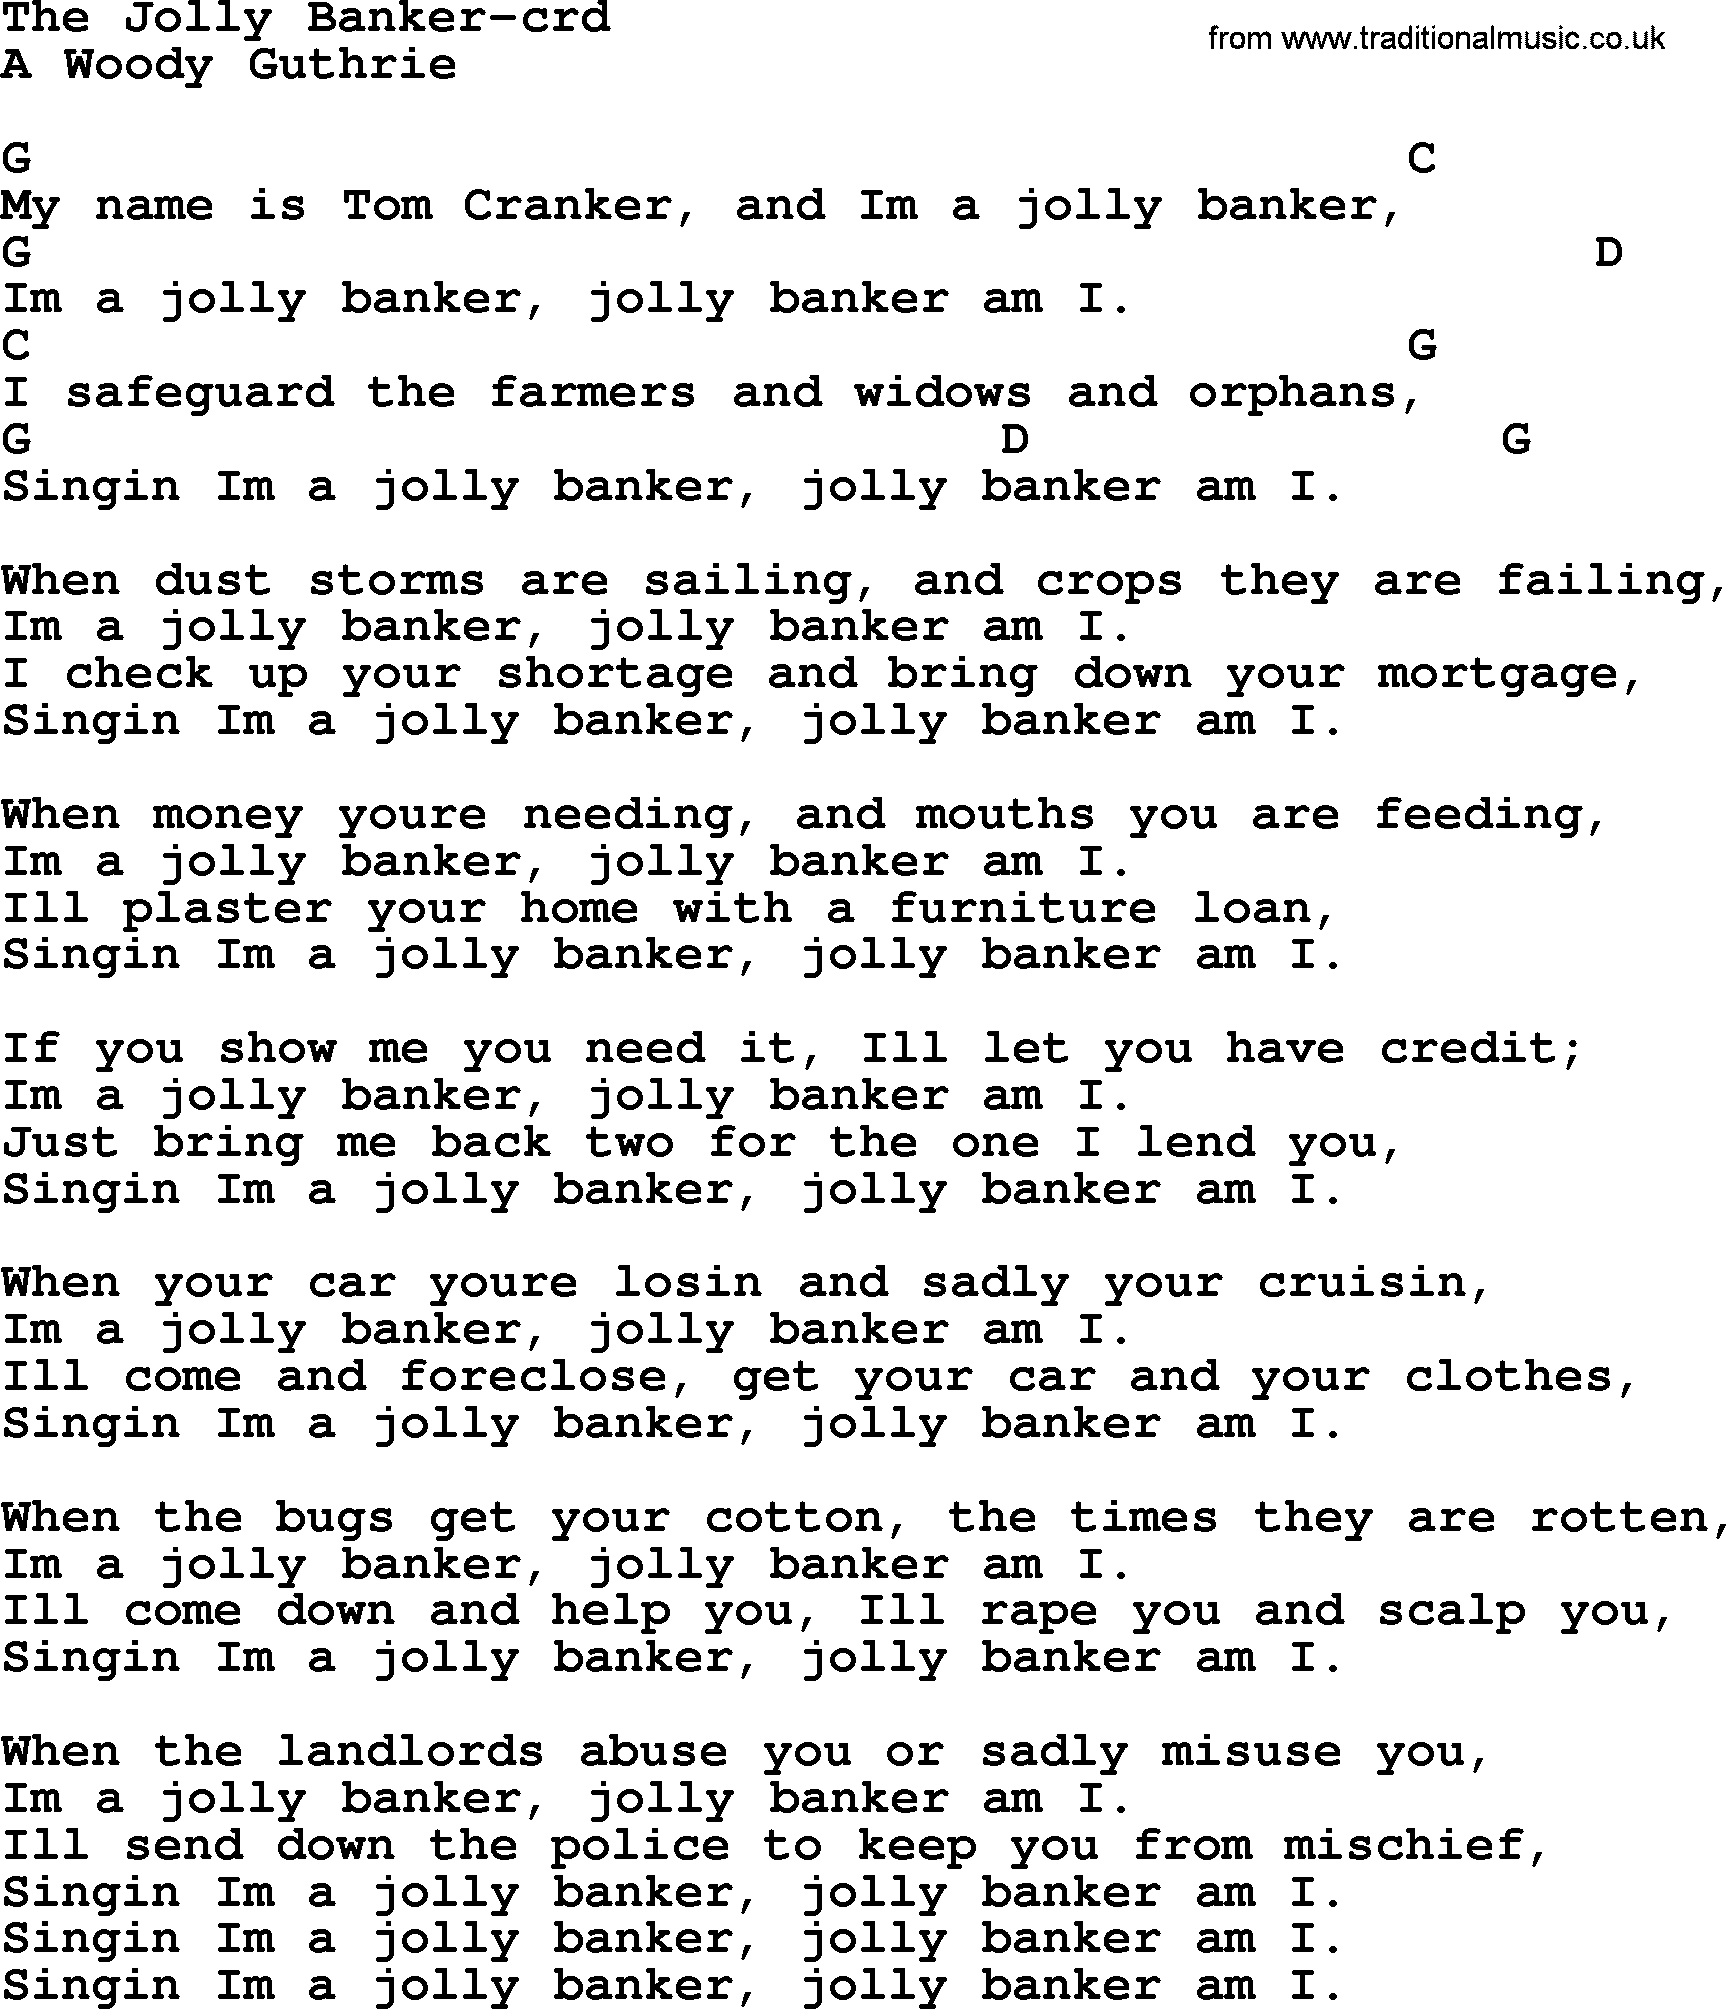 Woody Guthrie song The Jolly Banker lyrics and chords